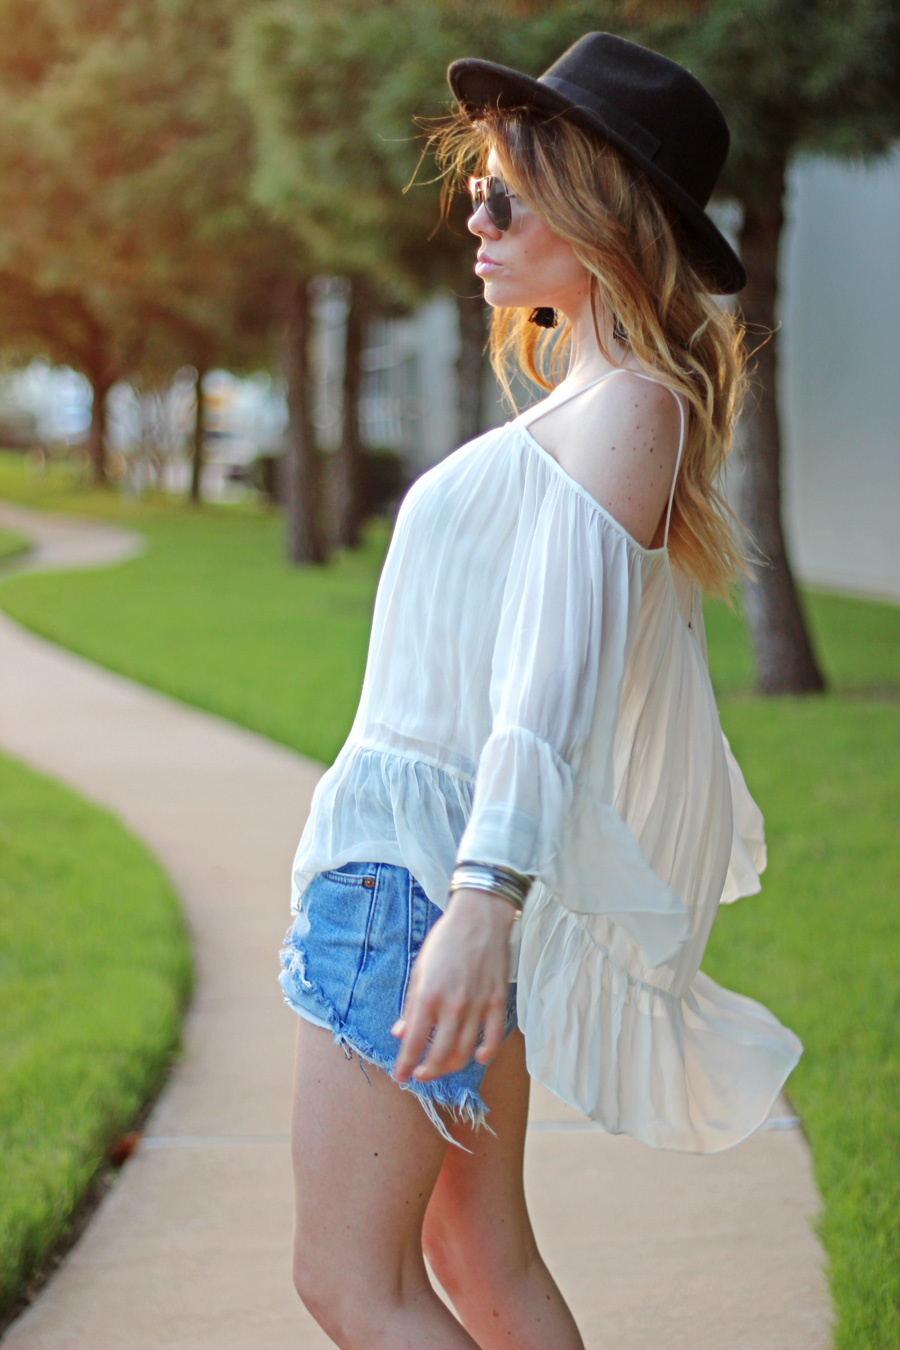 Off-The-Shoulder – Only If You Love It